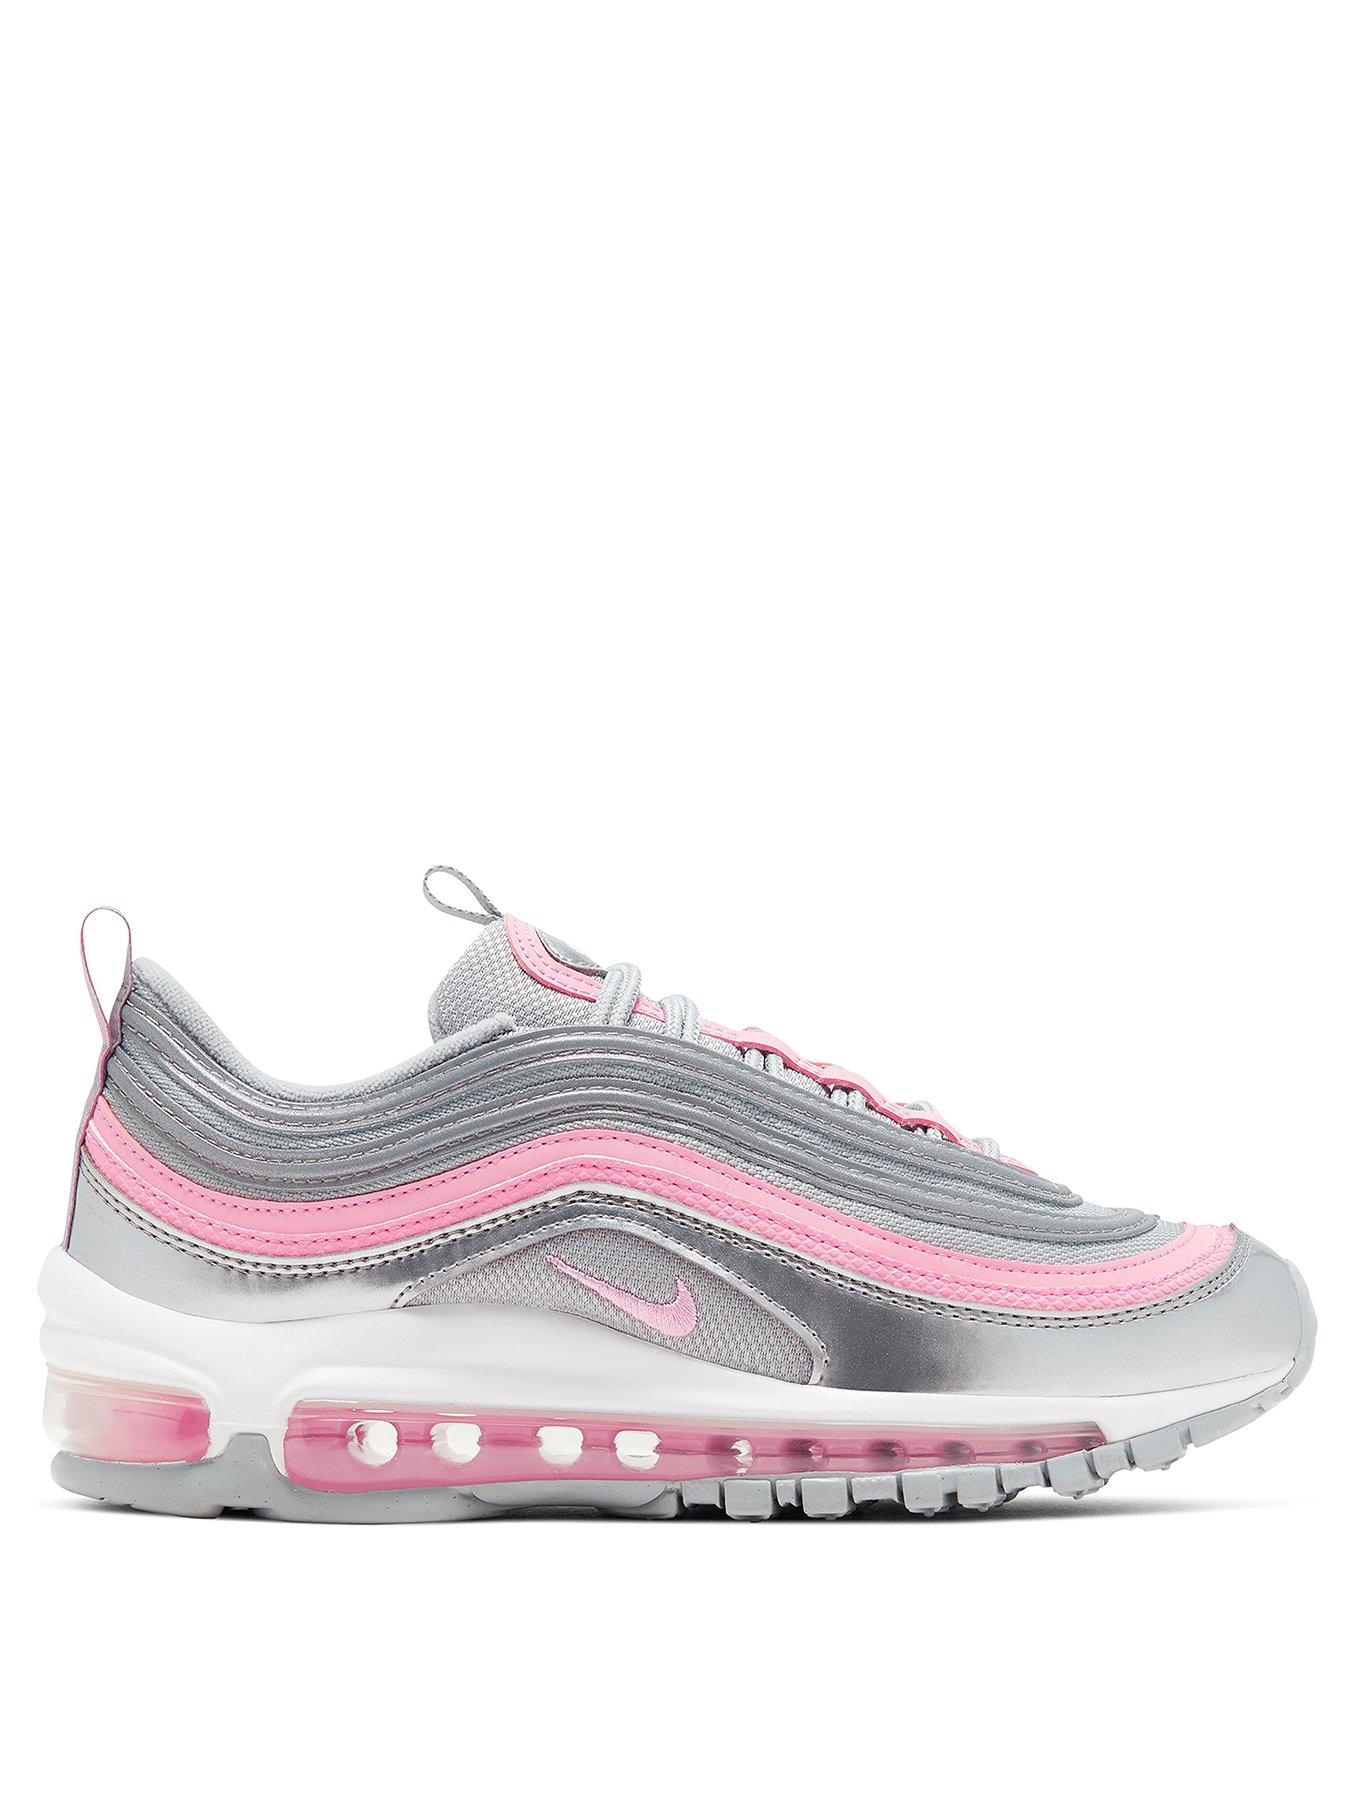 nike 97 grey and pink